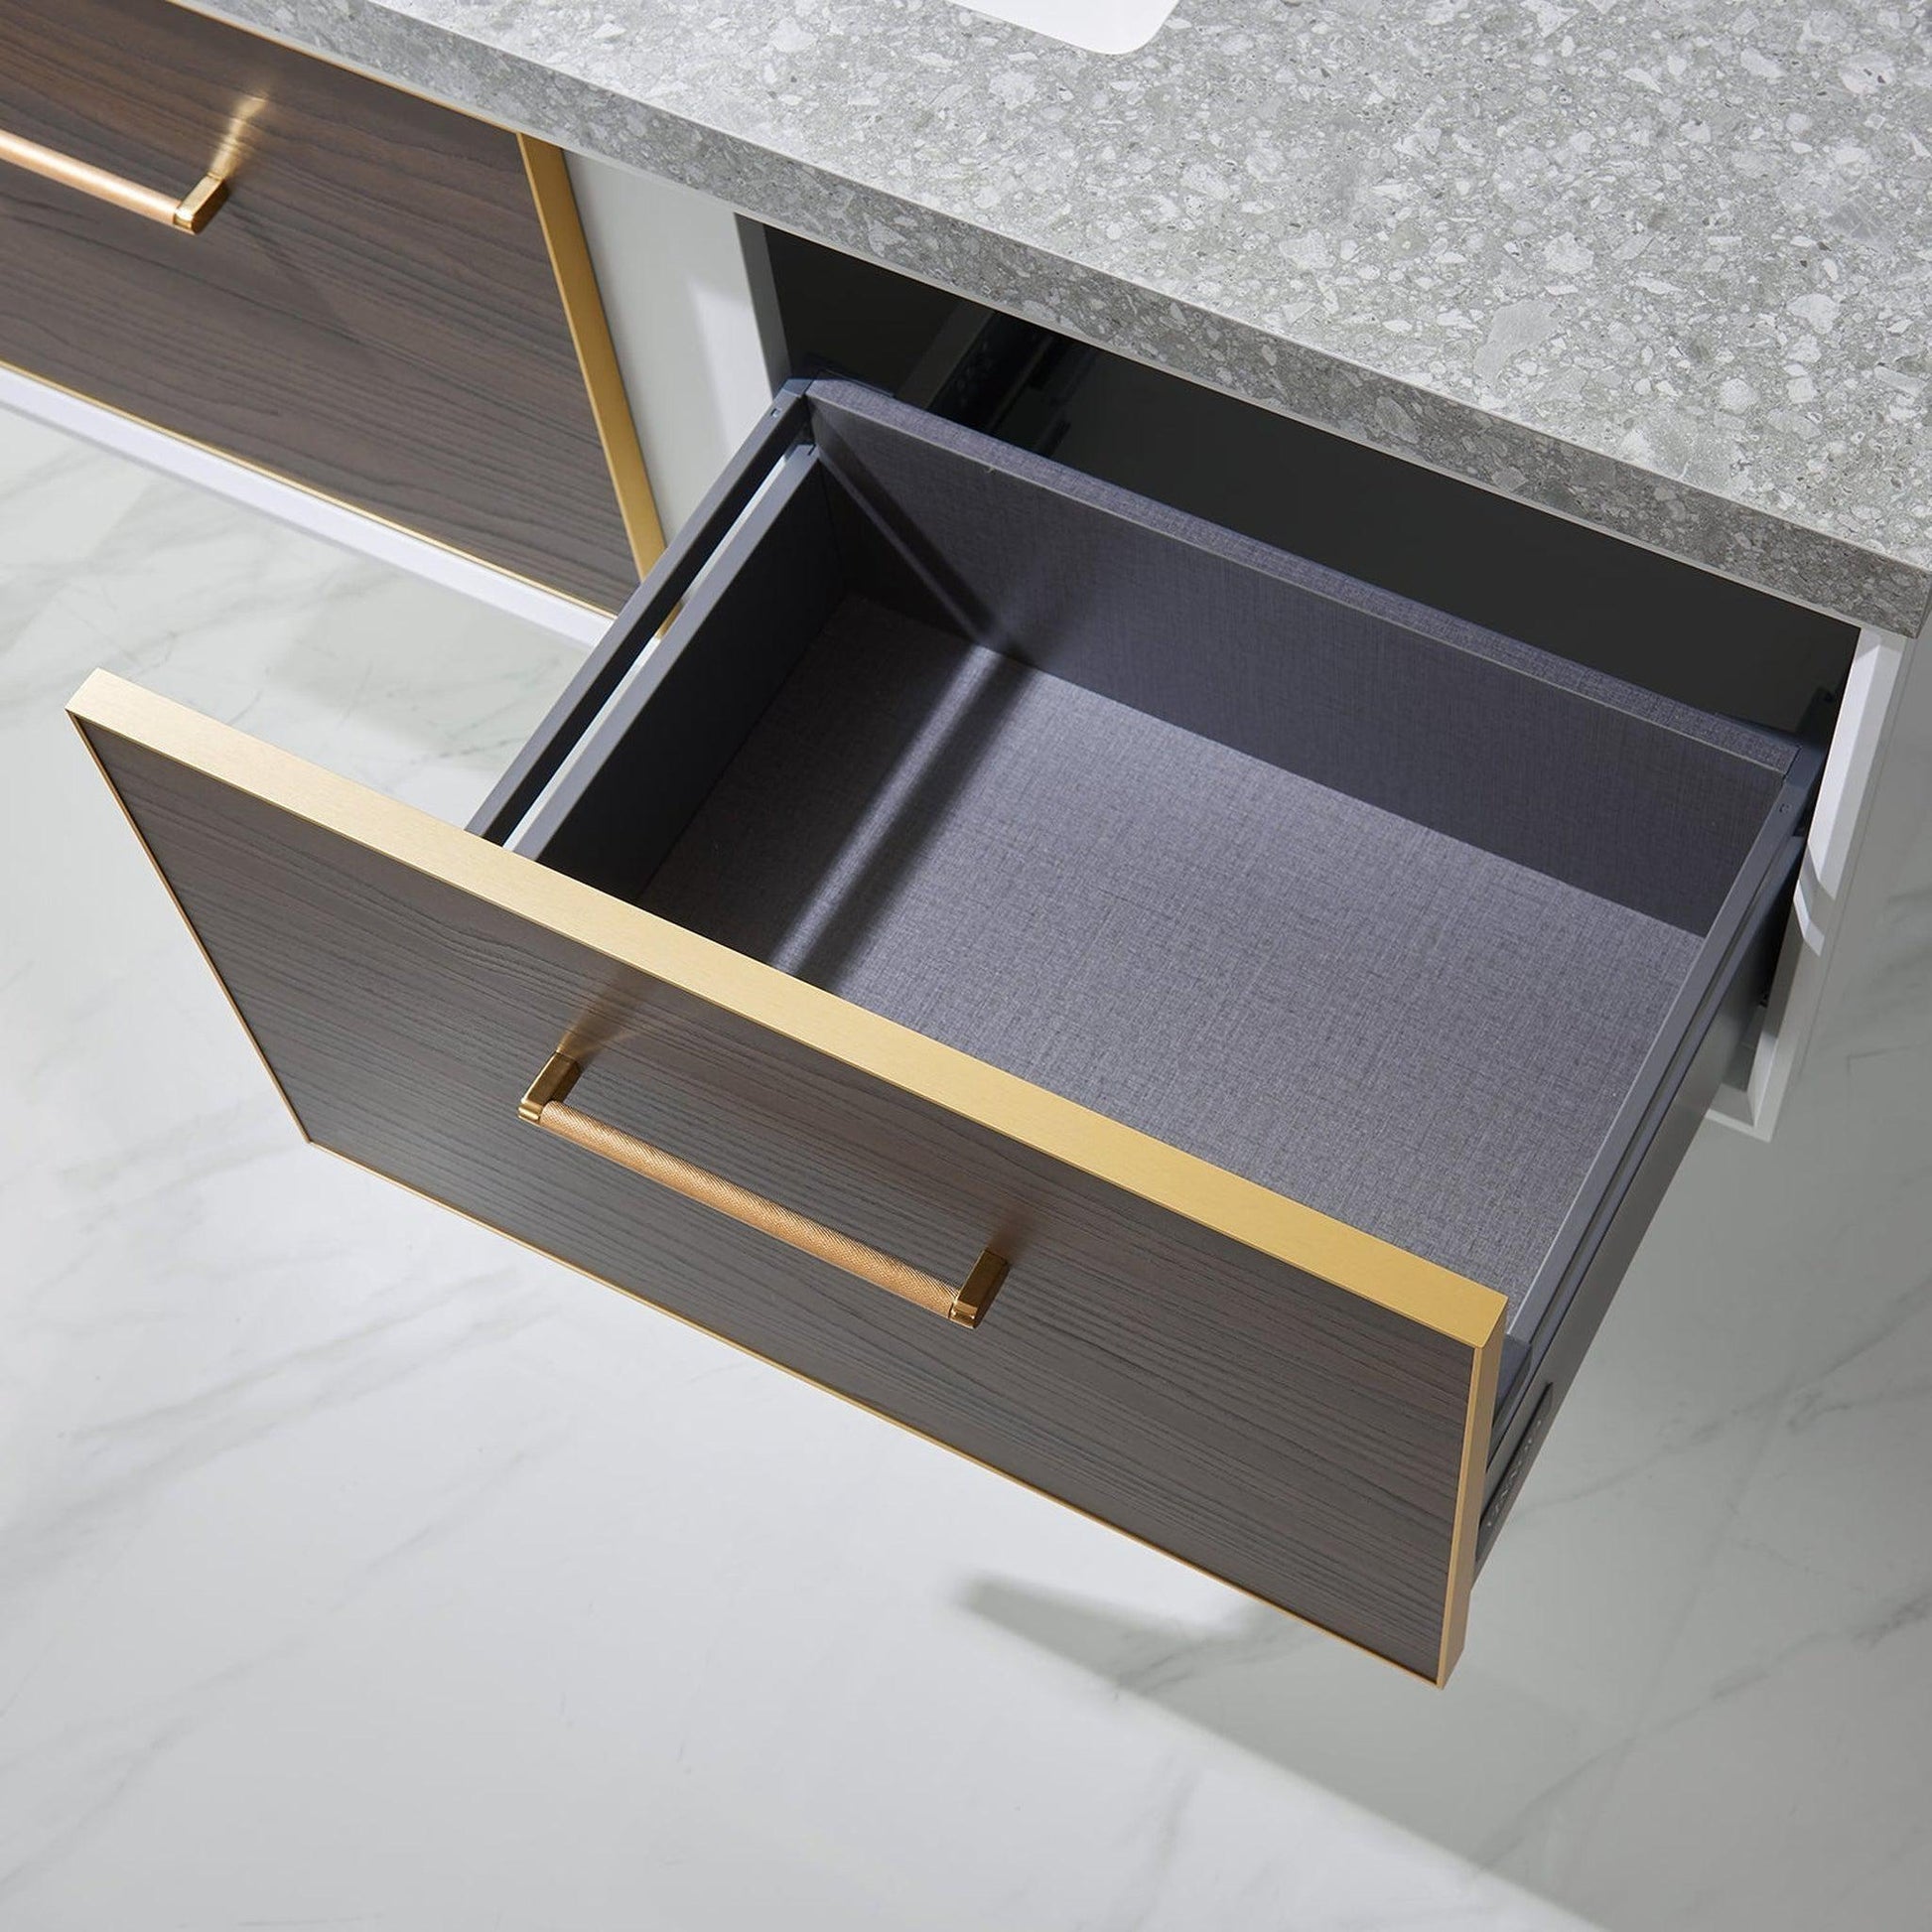 Vinnova Caparroso 48" Single Sink Floating Bathroom Vanity In Dark Walnut And Brushed Gold Hardware Finish With Grey Sintered Stone Top And Mirror